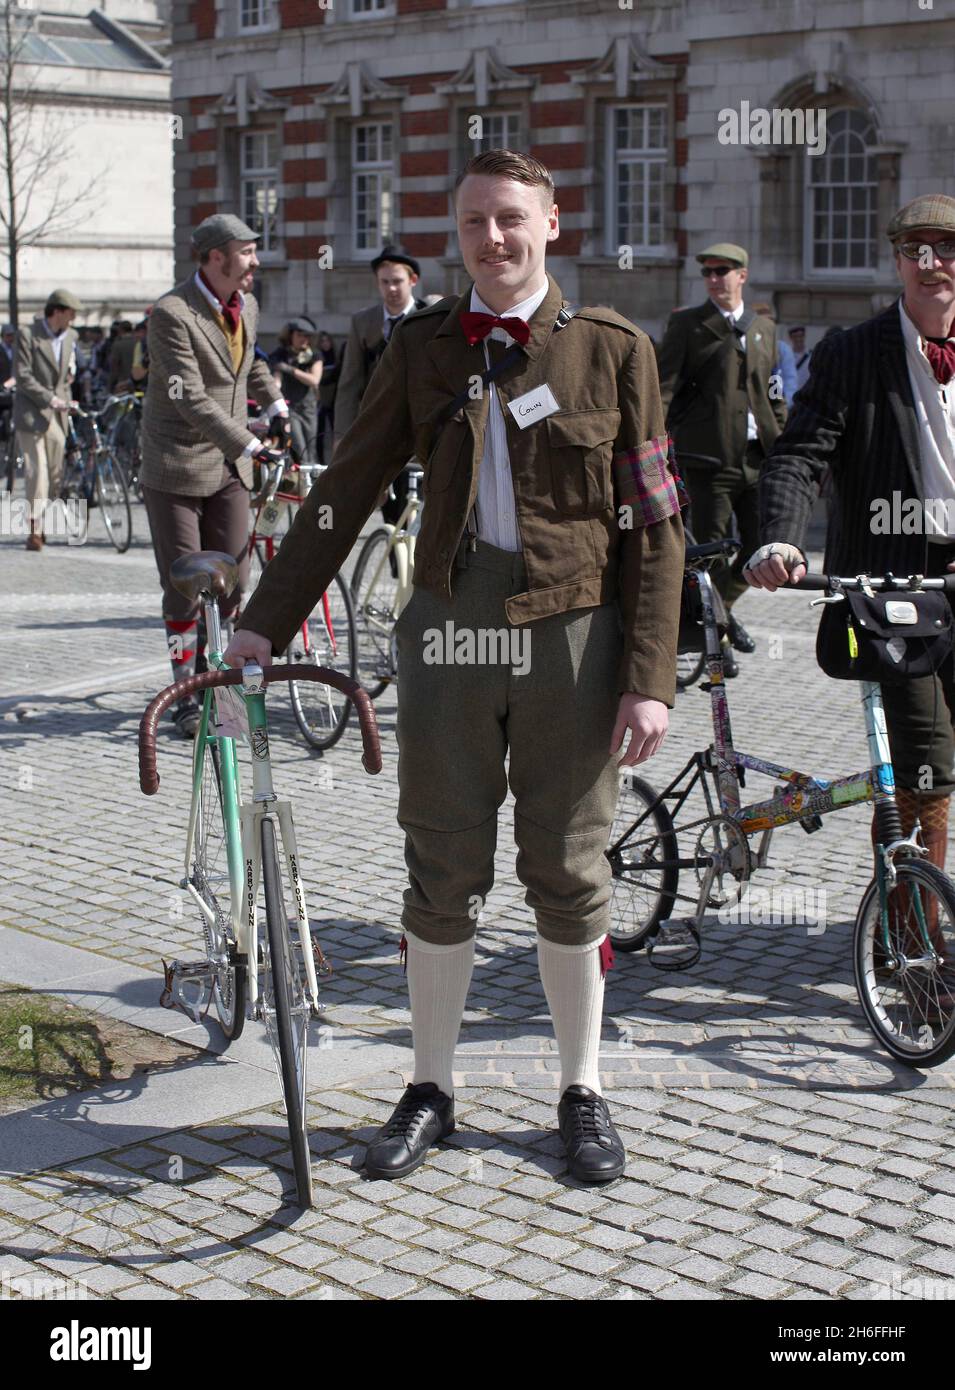 The 2nd Annual Tweed Run took place in London today. 400 ladies and gentlemen, dressed in plus-fours, Harris tweed jackets, merino wool team jerseys, silk cravats and jaunty flat caps, took a leisurely 14 mile ride across the capital enjoying all things quintessentially British from the bygone eras of the 1920s & 30s. Stock Photo